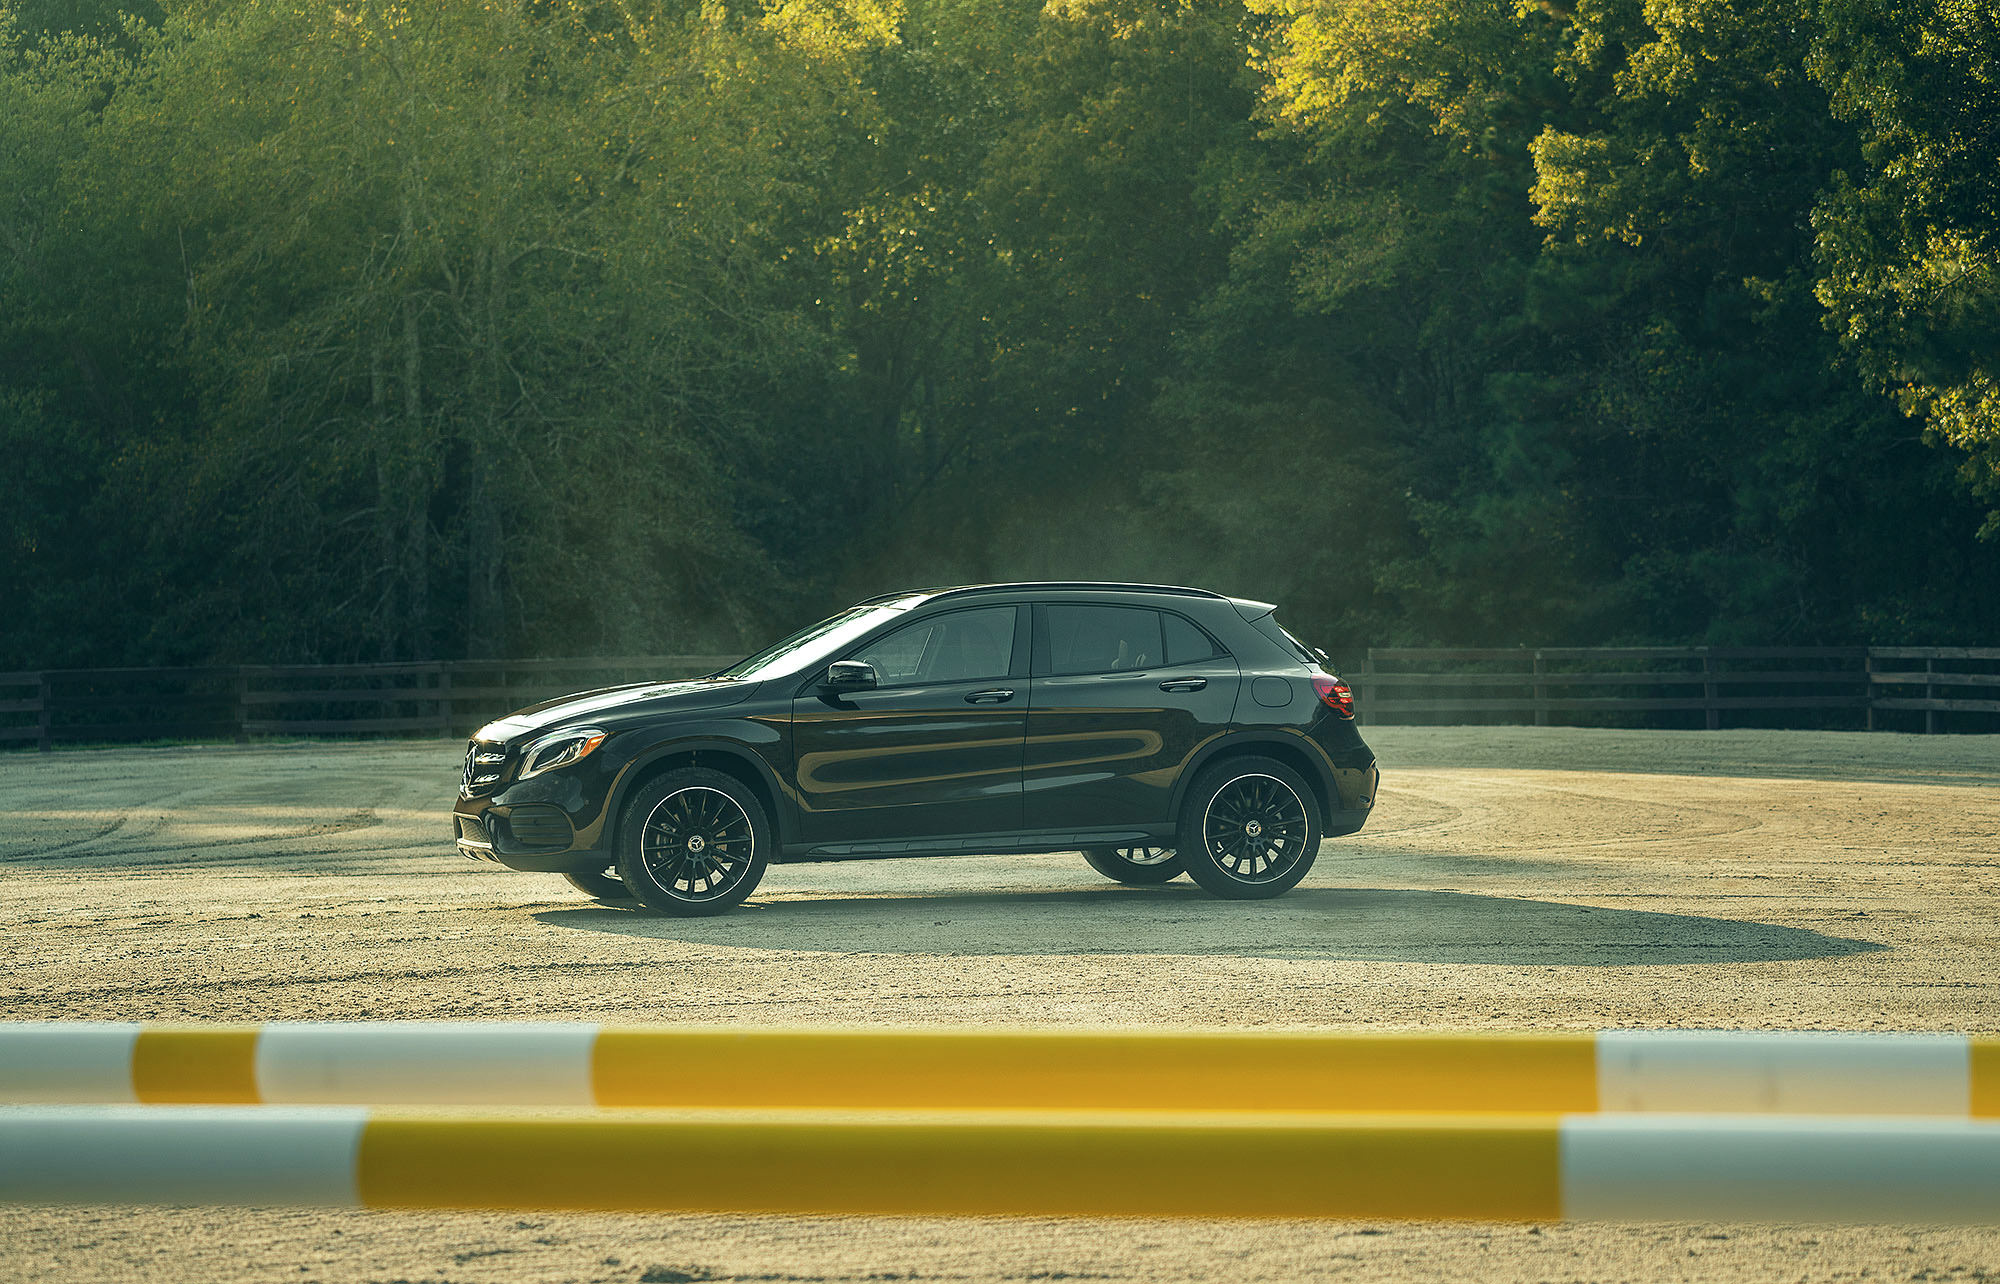 Mercedes-Benz GLA SUV in horse riding arena